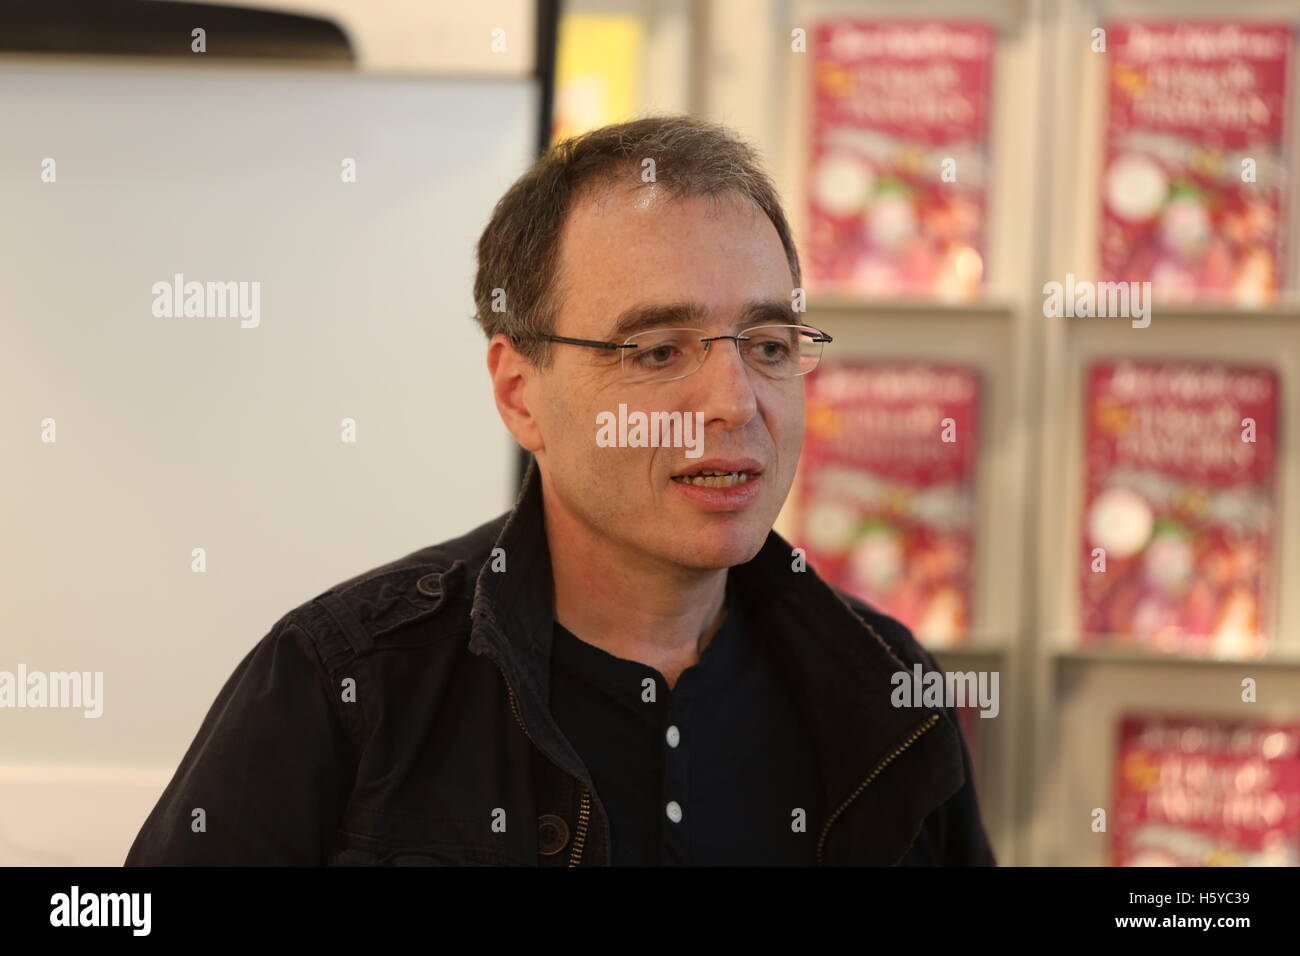 David Safier presenting and signing his new book 'Traumprinz' (lit. 'Dream Prince') at the stand of Rowohlt publisher at the Frankfurt Book Fair in Frankfurt/Main, Germany, 20 October 2016. PHOTO: SUSANNAH V. VERGAU/dpa - NO WIRE SERVICE - Stock Photo